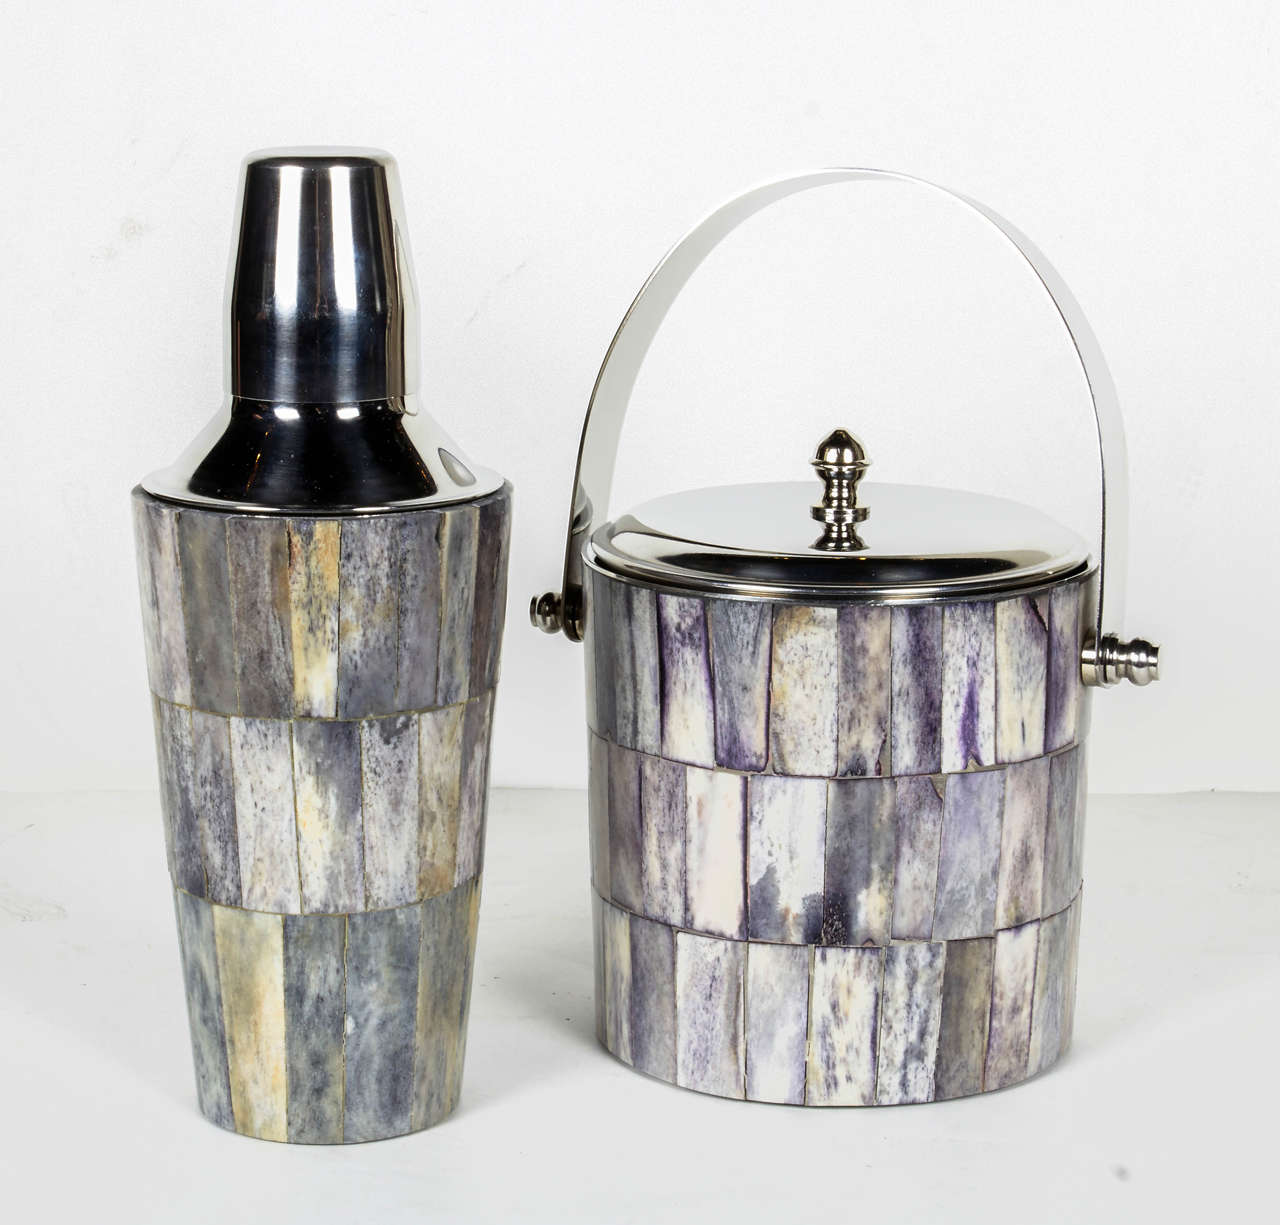 Uber chic barware set in tesselated bone tiles and polished chrome. Bone tiles have varient hues of grey, ivory, and slight shades of tan. The set consists of a matching cocktail shaker and ice bucket (or wine cooler) with chrome metal tongs.  Great